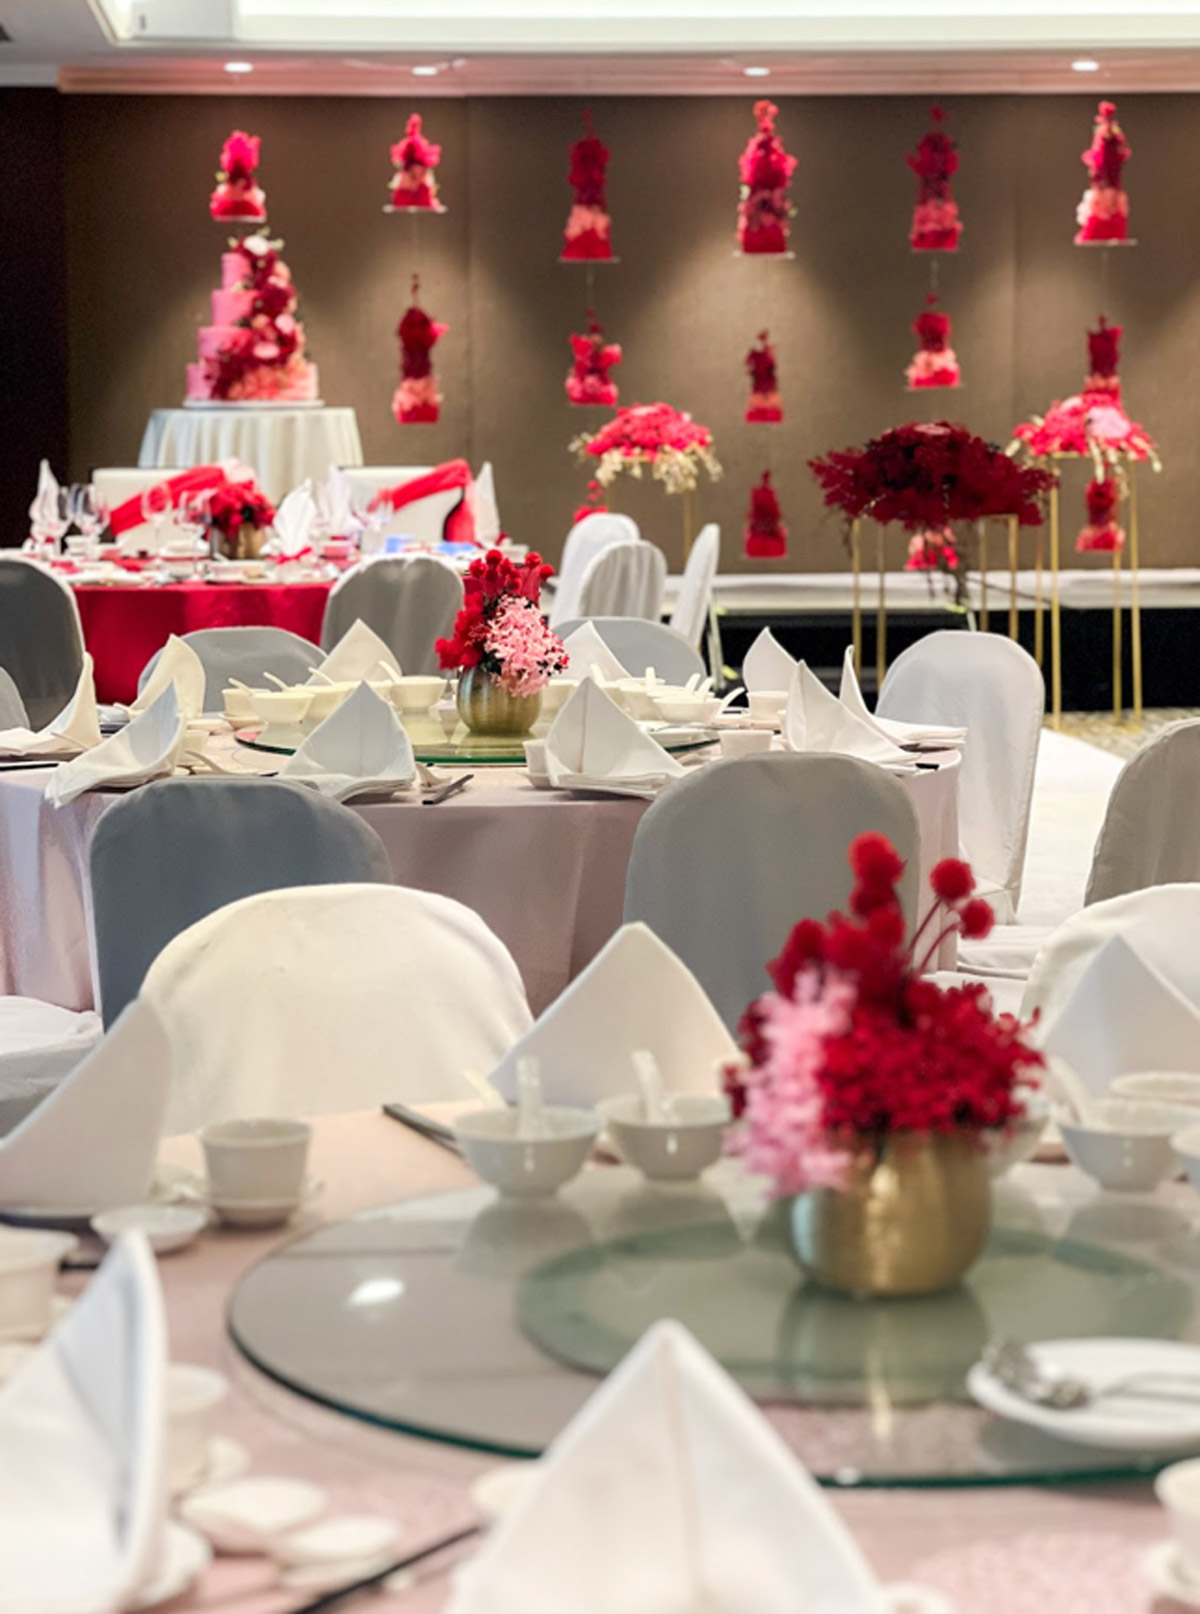 Celebrating Love in Elegance: M Hotel Singapore's Unforgettable Wedding Experience